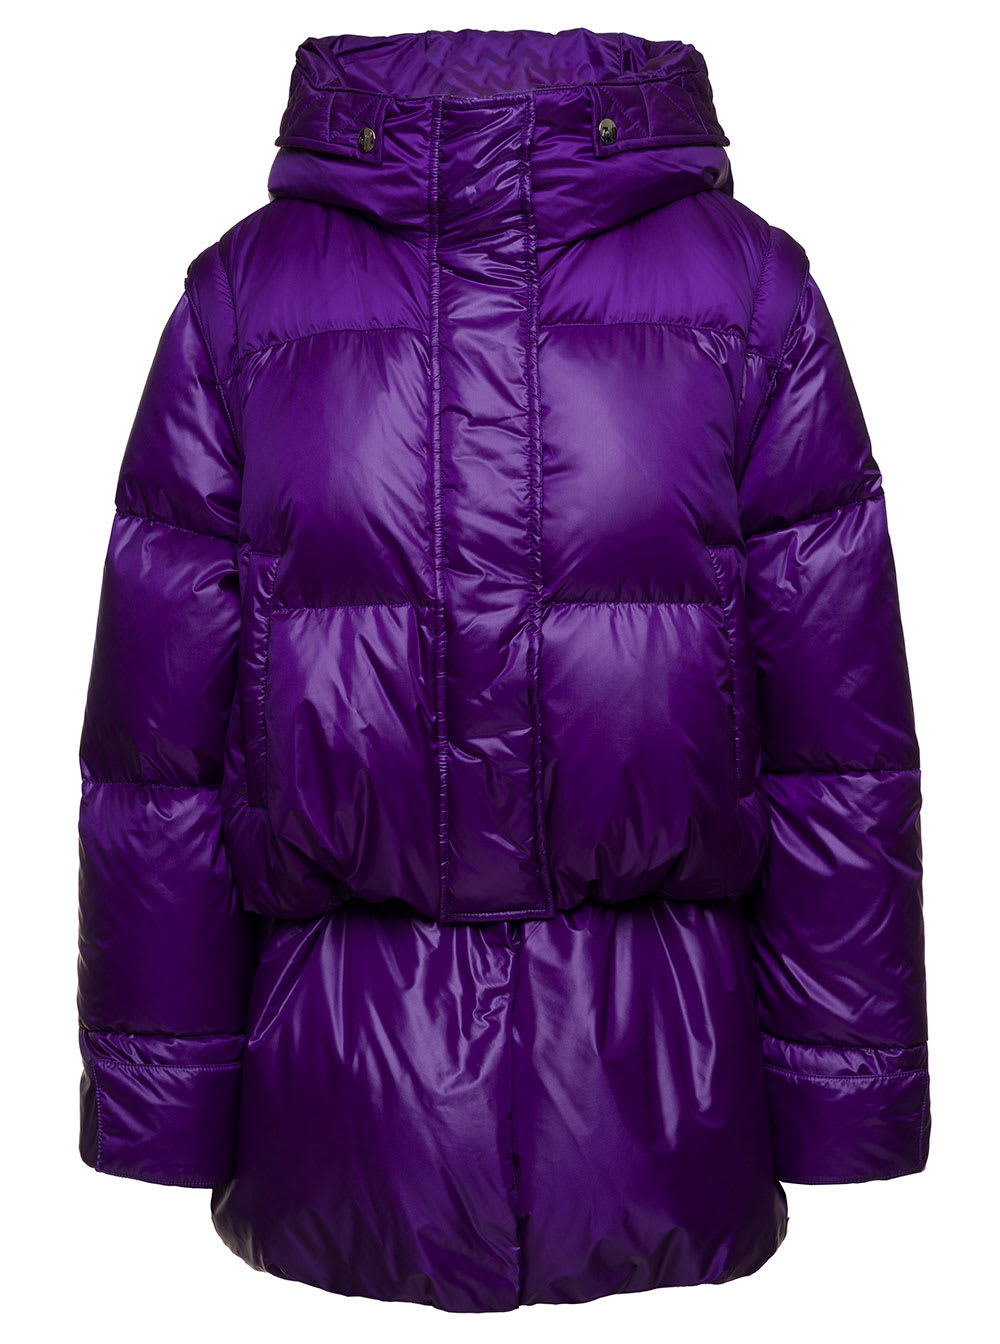 chiara Purple Down Jacket With Detachable Sleeves And End Band With Shiny Finish In Nylon Woman Anitroc